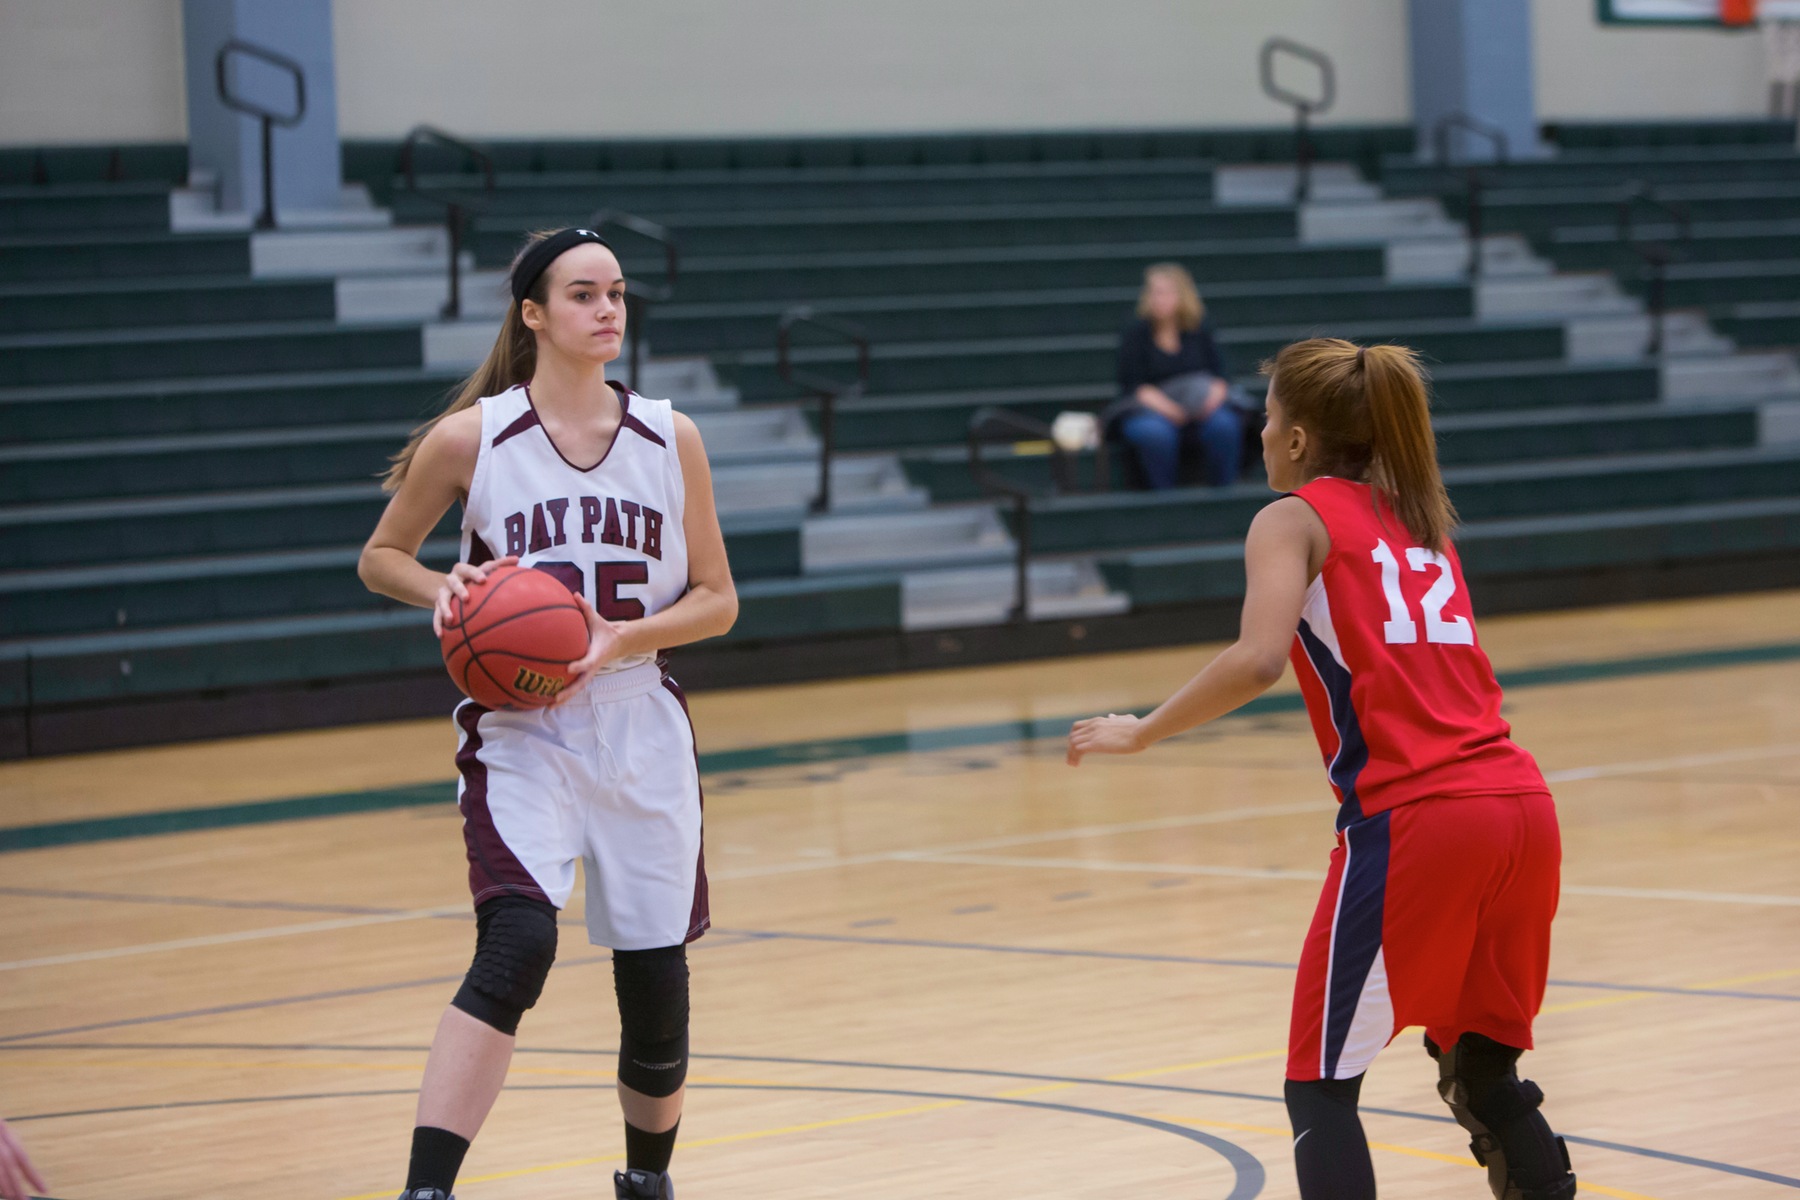 Wildcats Fall 60-53 to NECC Opponents Lesley Lynx